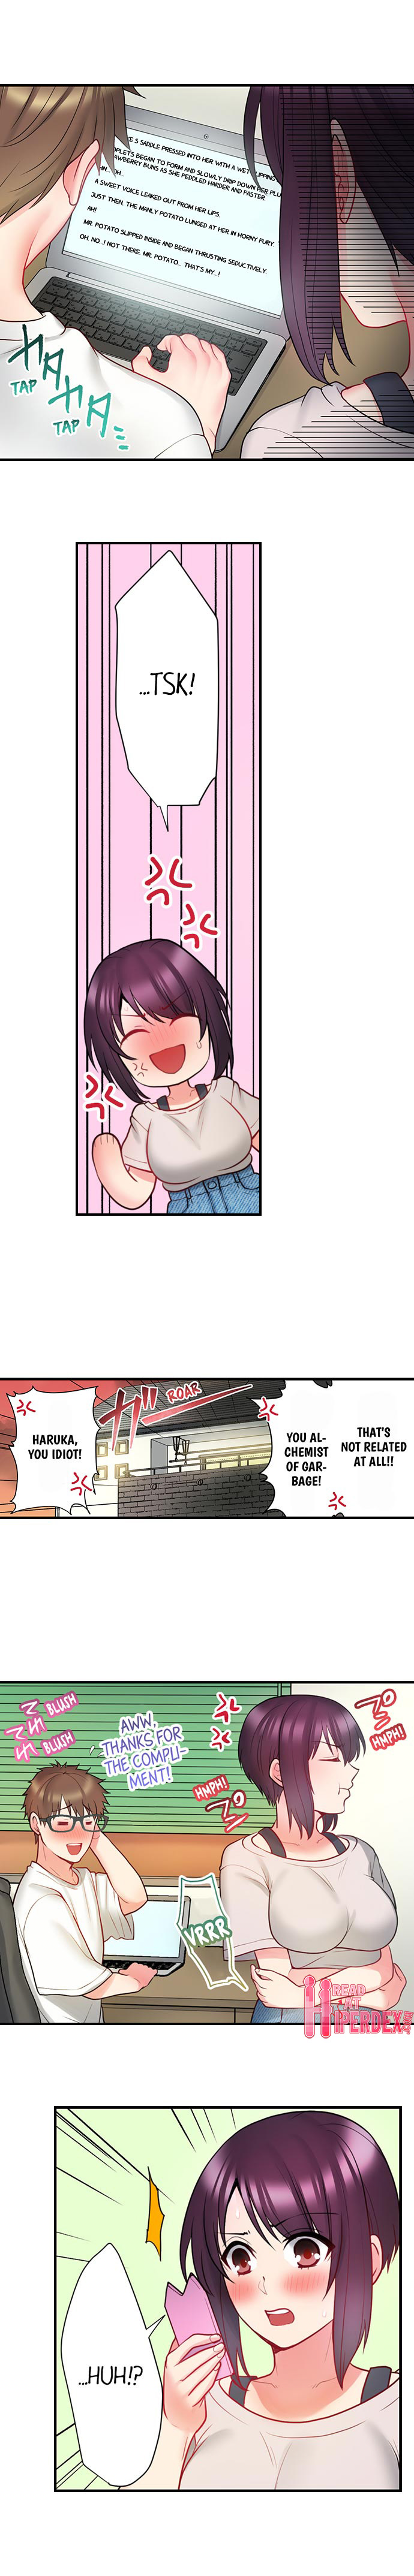 Bike Delivery Girl, Cumming To Your Door! - Chapter 9 Page 9